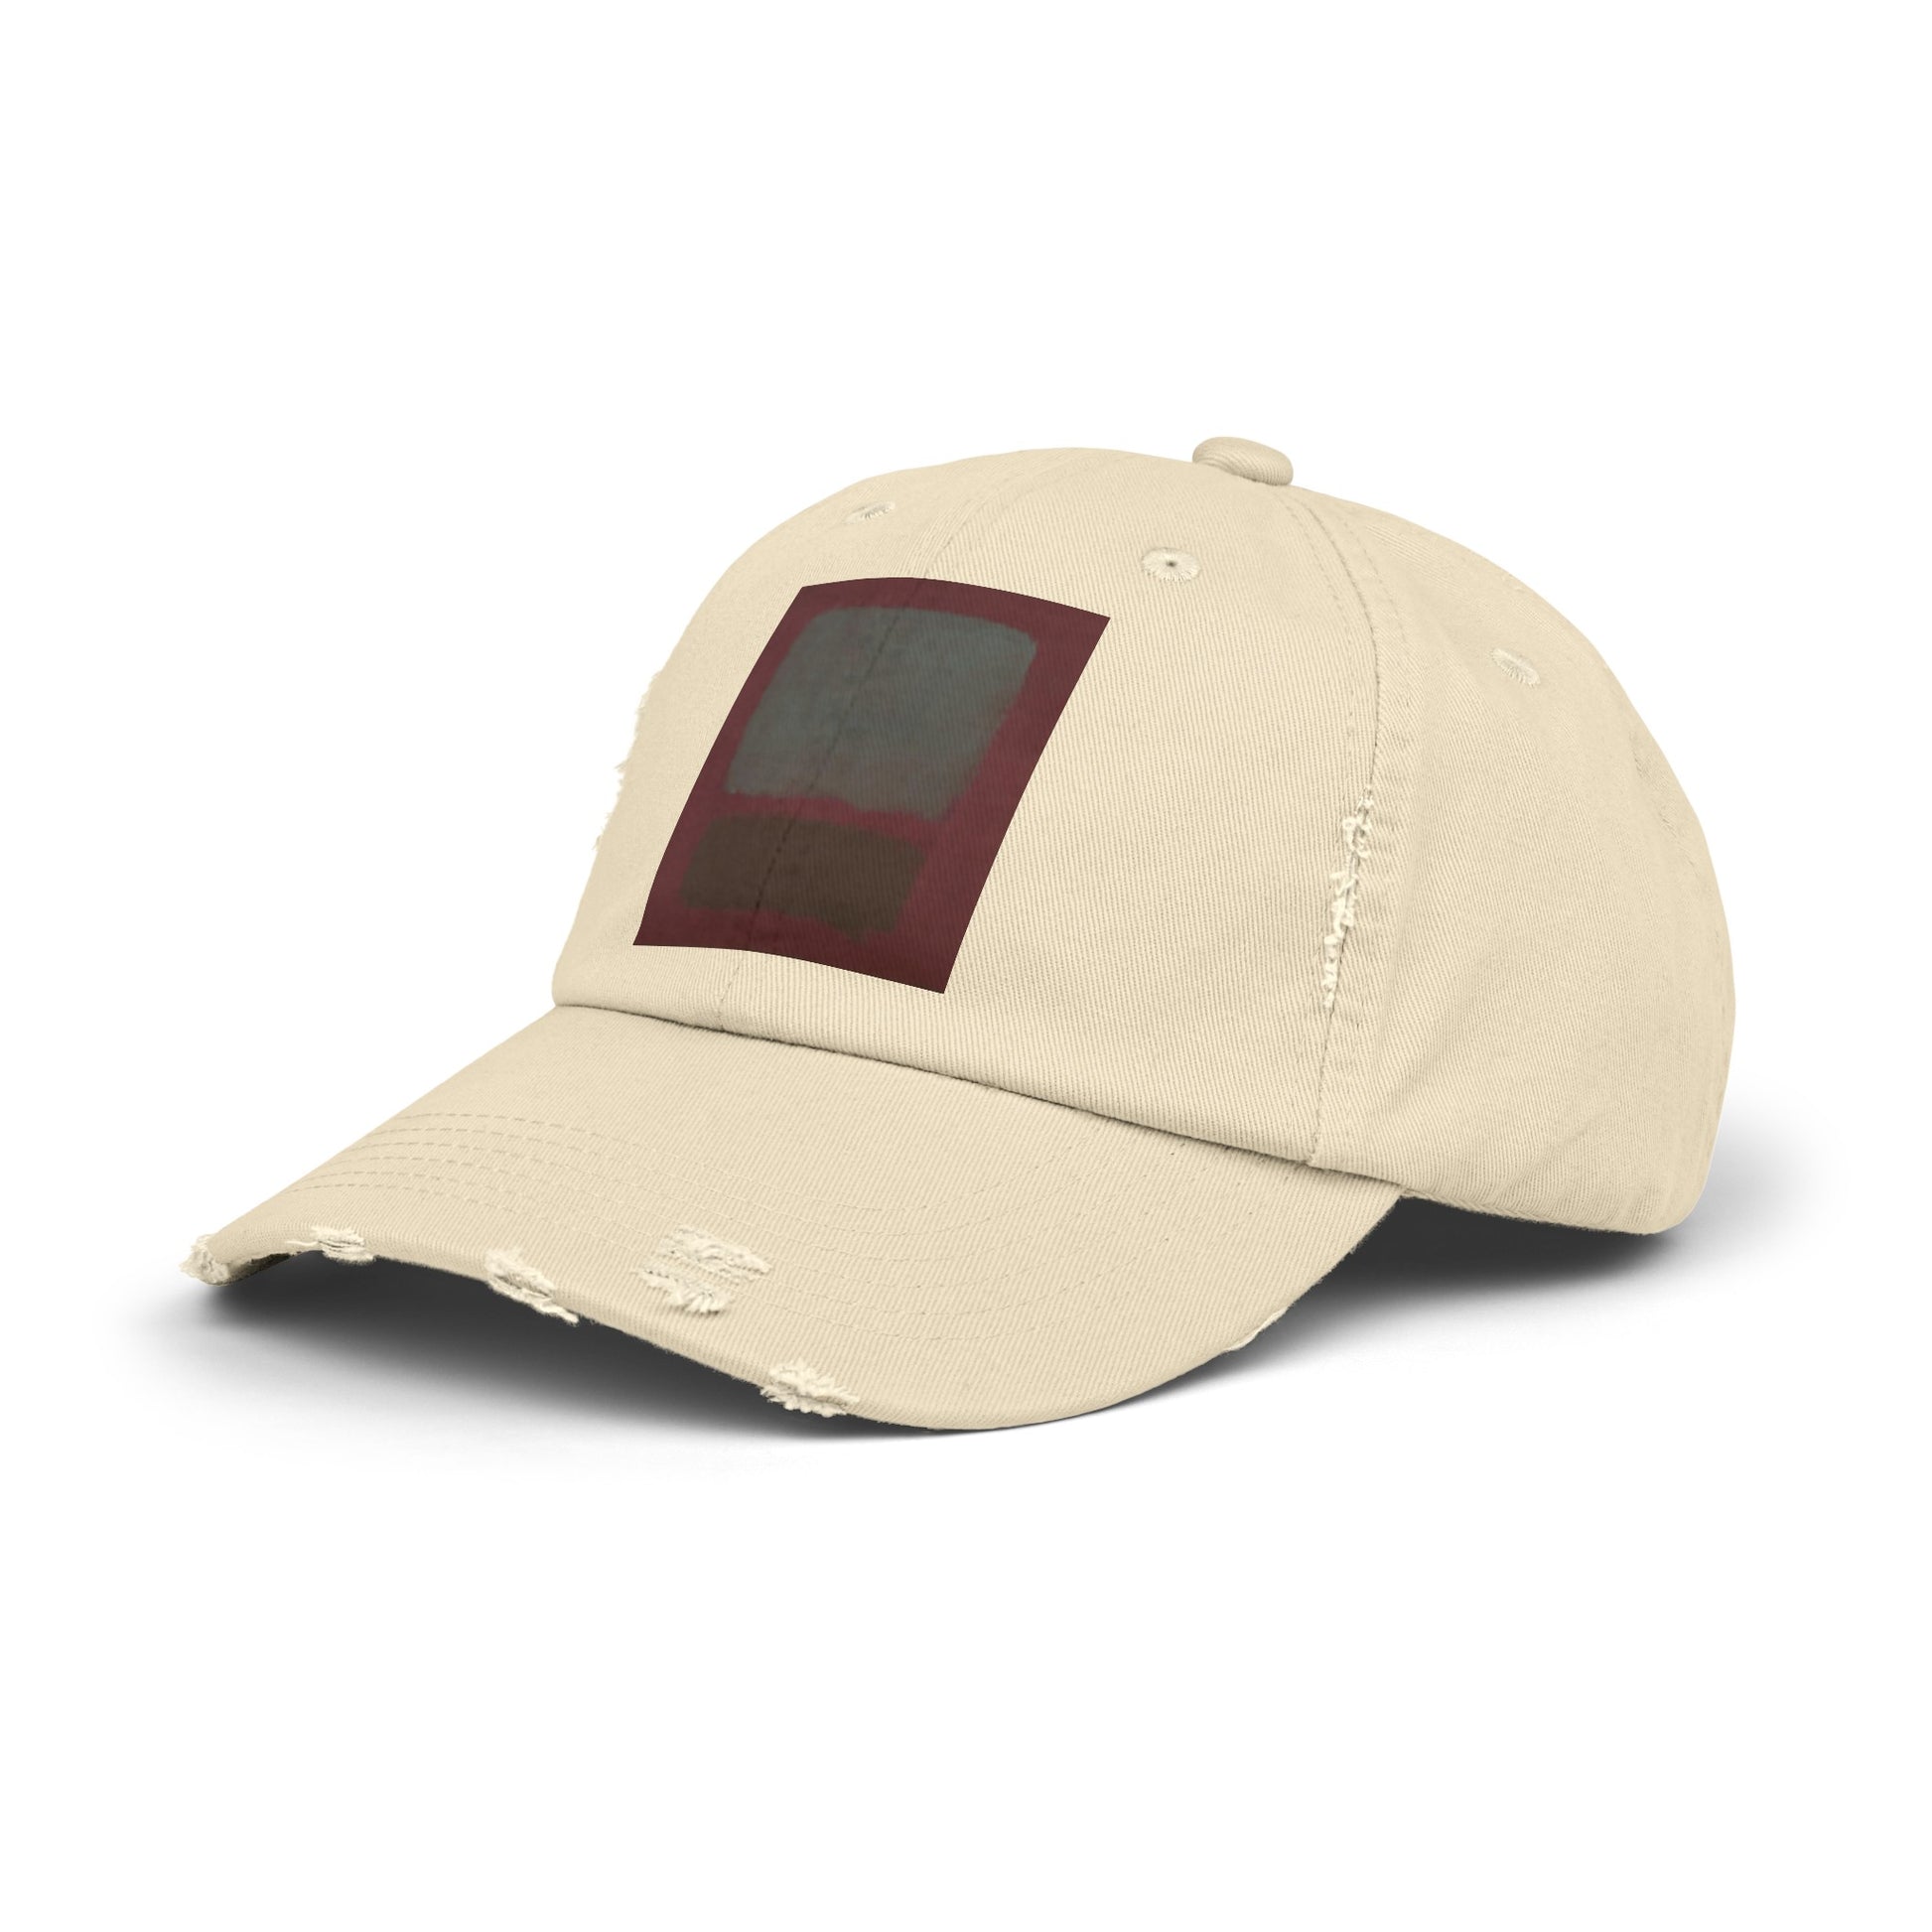 a white hat with a red patch on the front of it